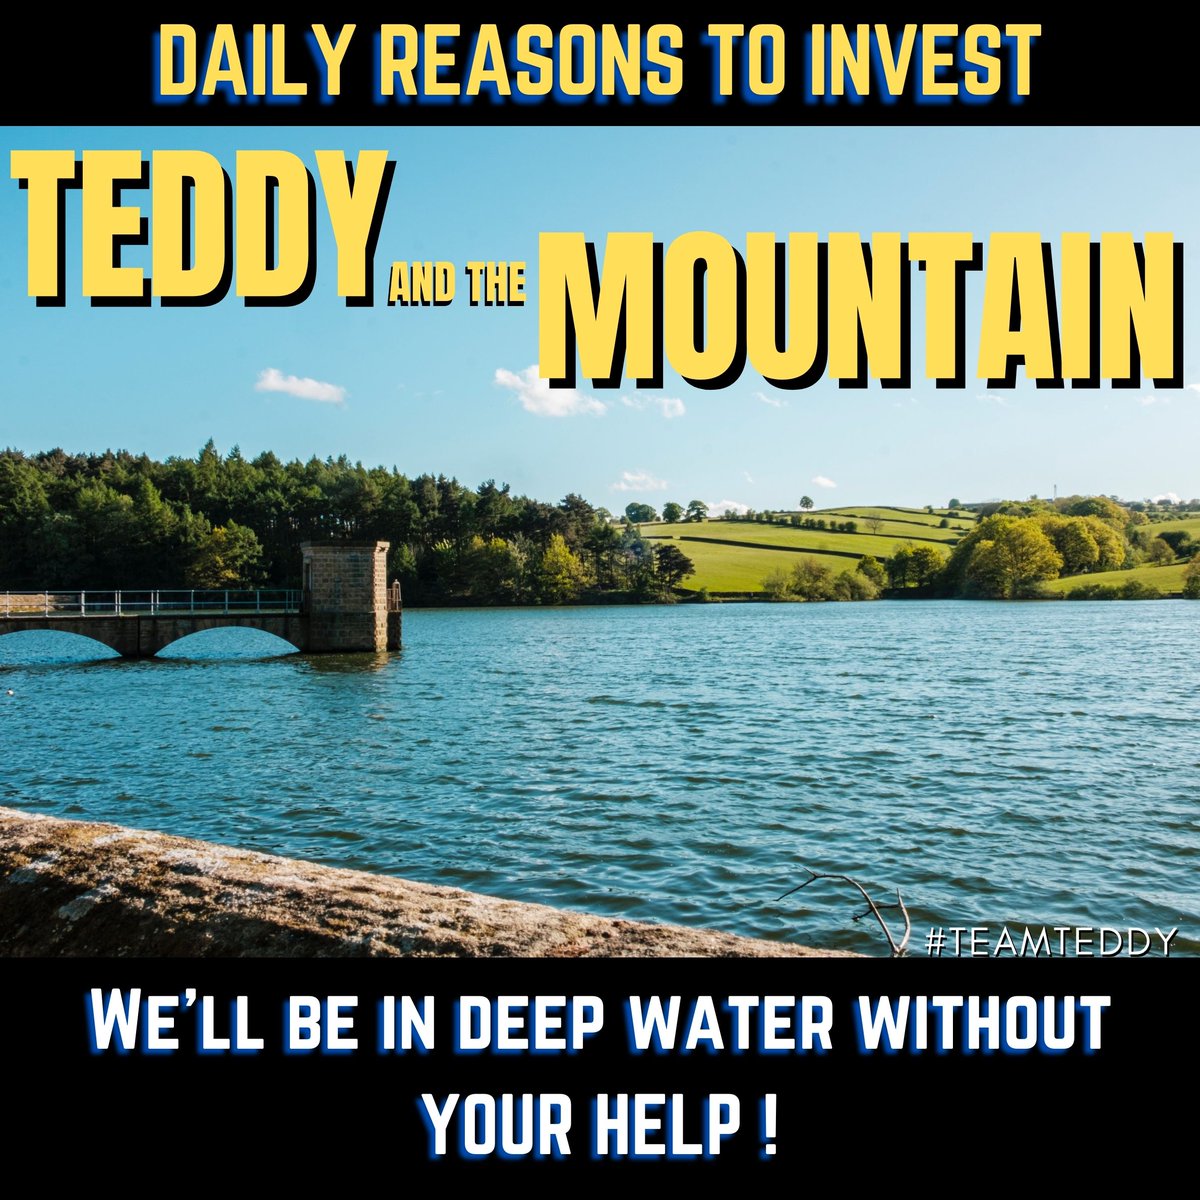 Help us make a home grown movie in Derbyshire. 
#TeamTeddy

igg.me/at/teddyfunds

#Your_PeakDistrict #peakdistrictphotography #countryside #visitpeakdistrict #landscapephotography #getoutside #matlock #photography #walking #outdoors #adventure #yourpeakdistrict